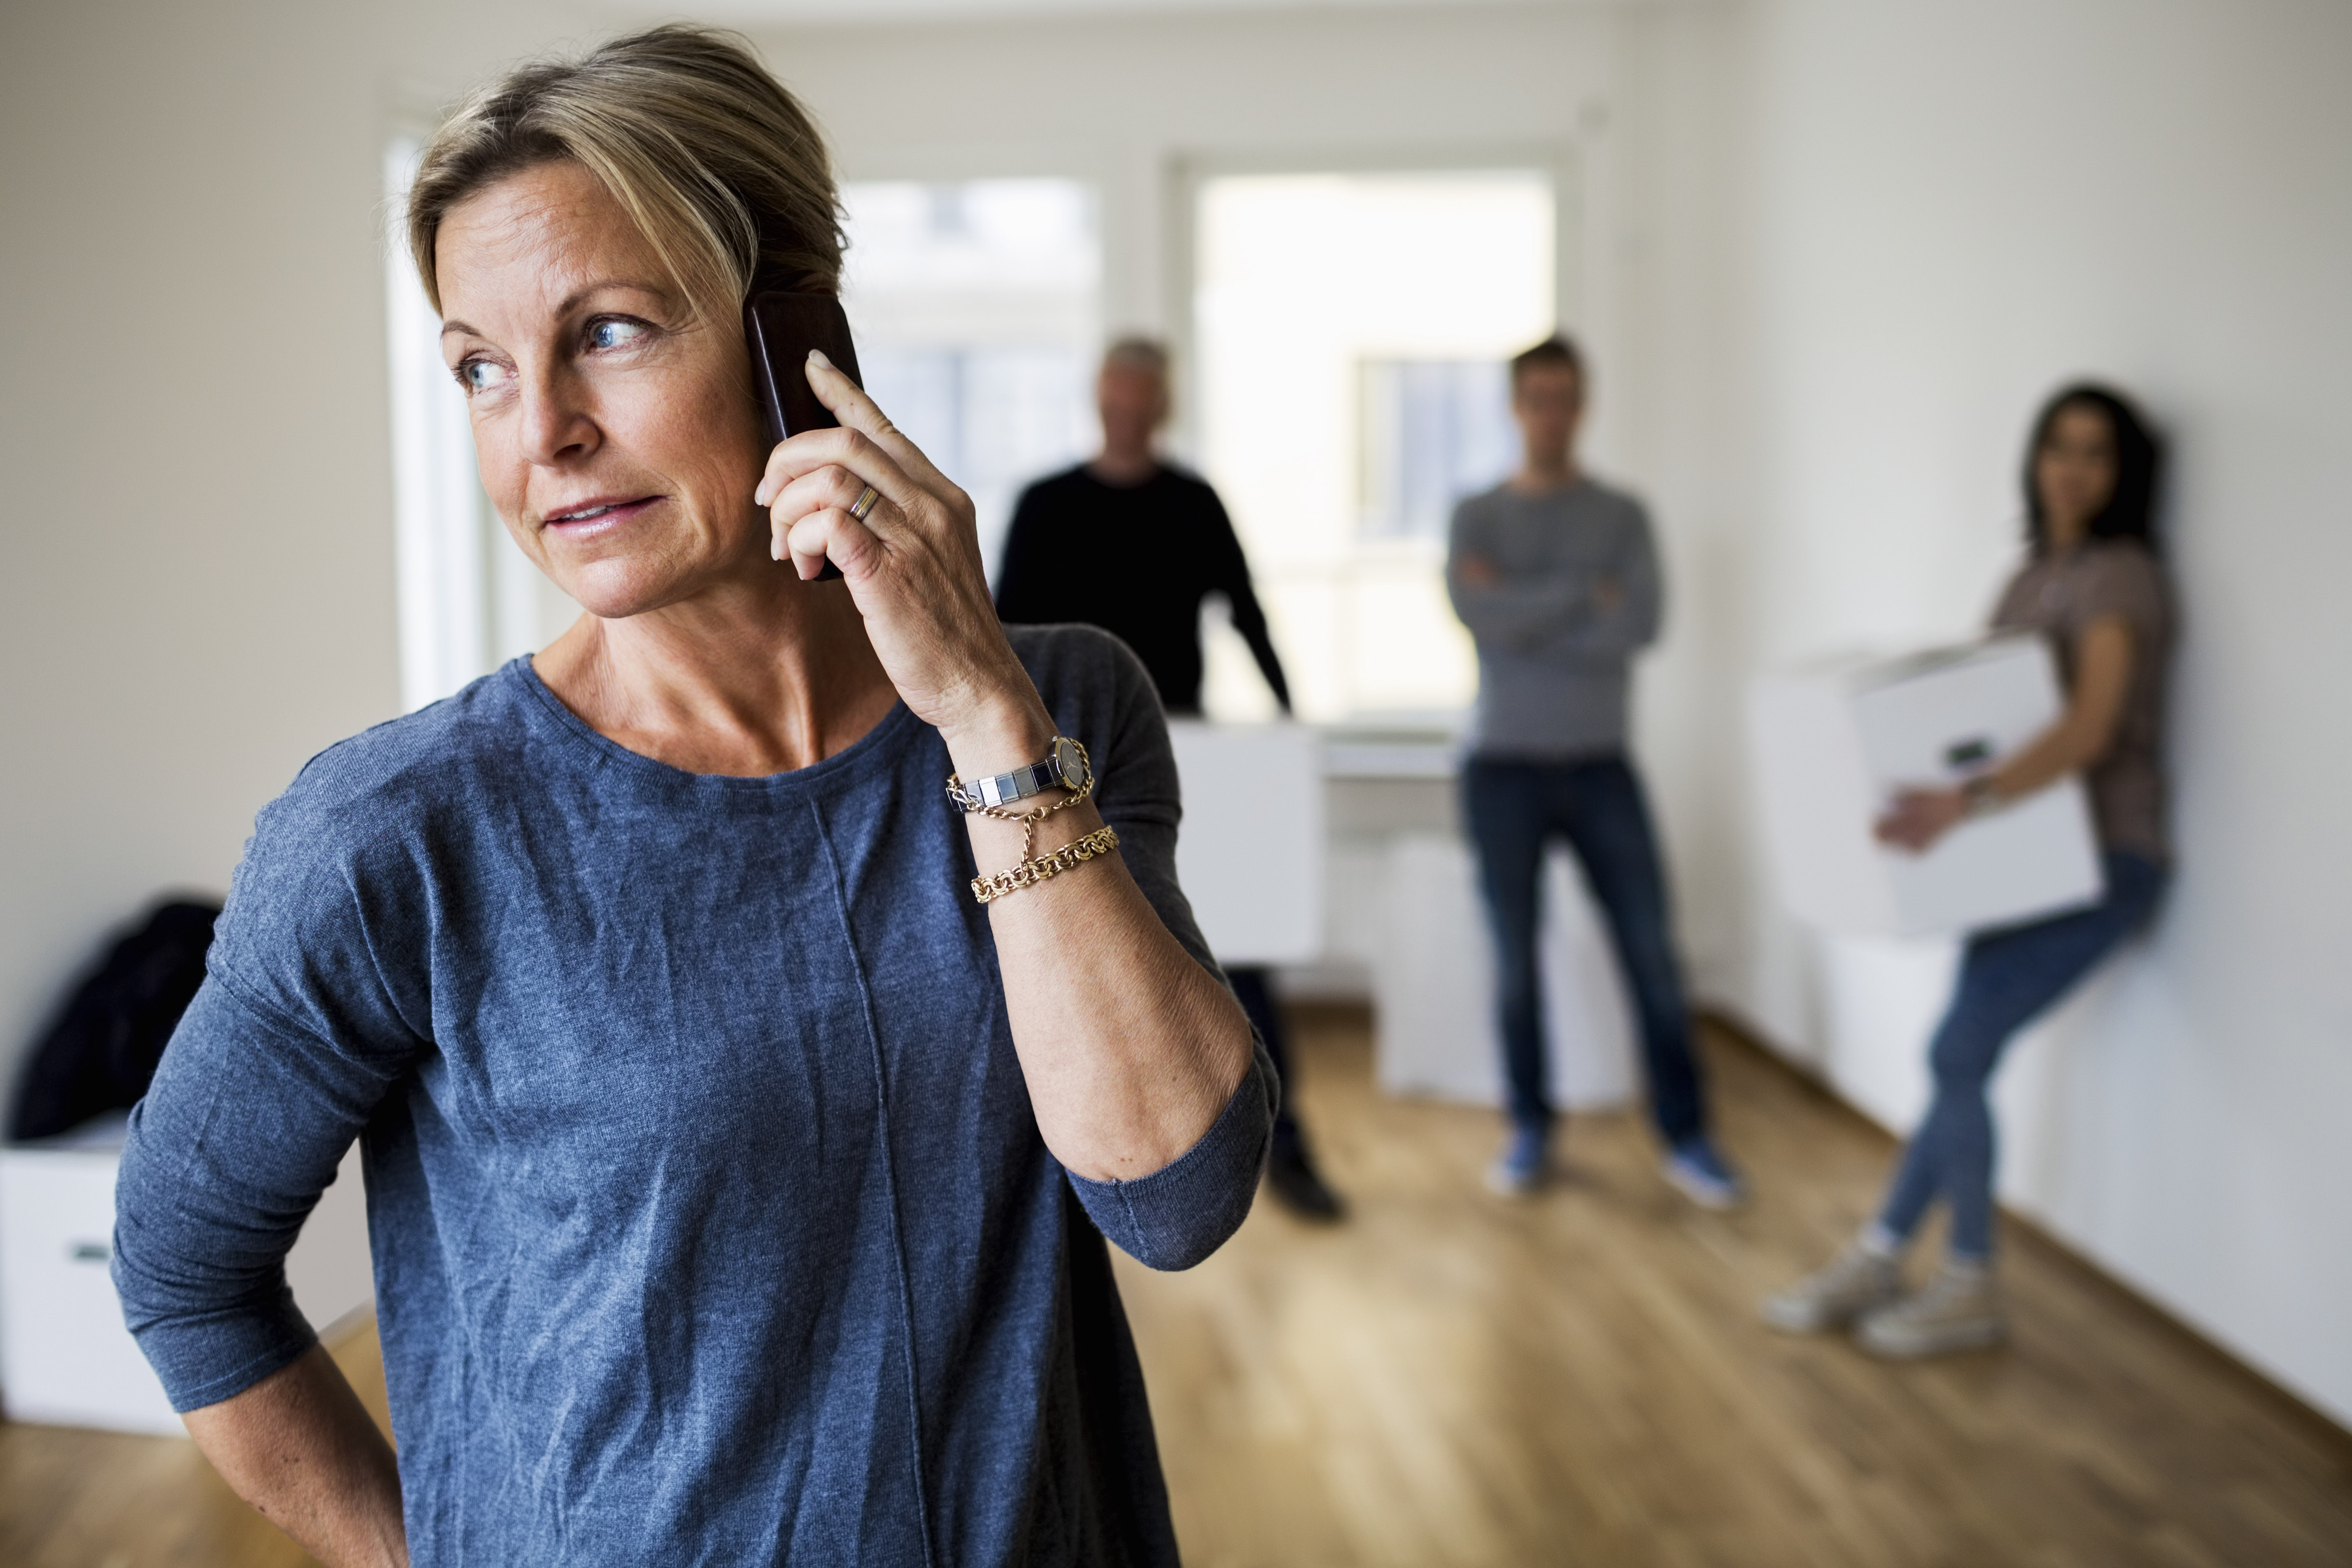 Mature woman on the phone with her family behind her | Source: Getty Images